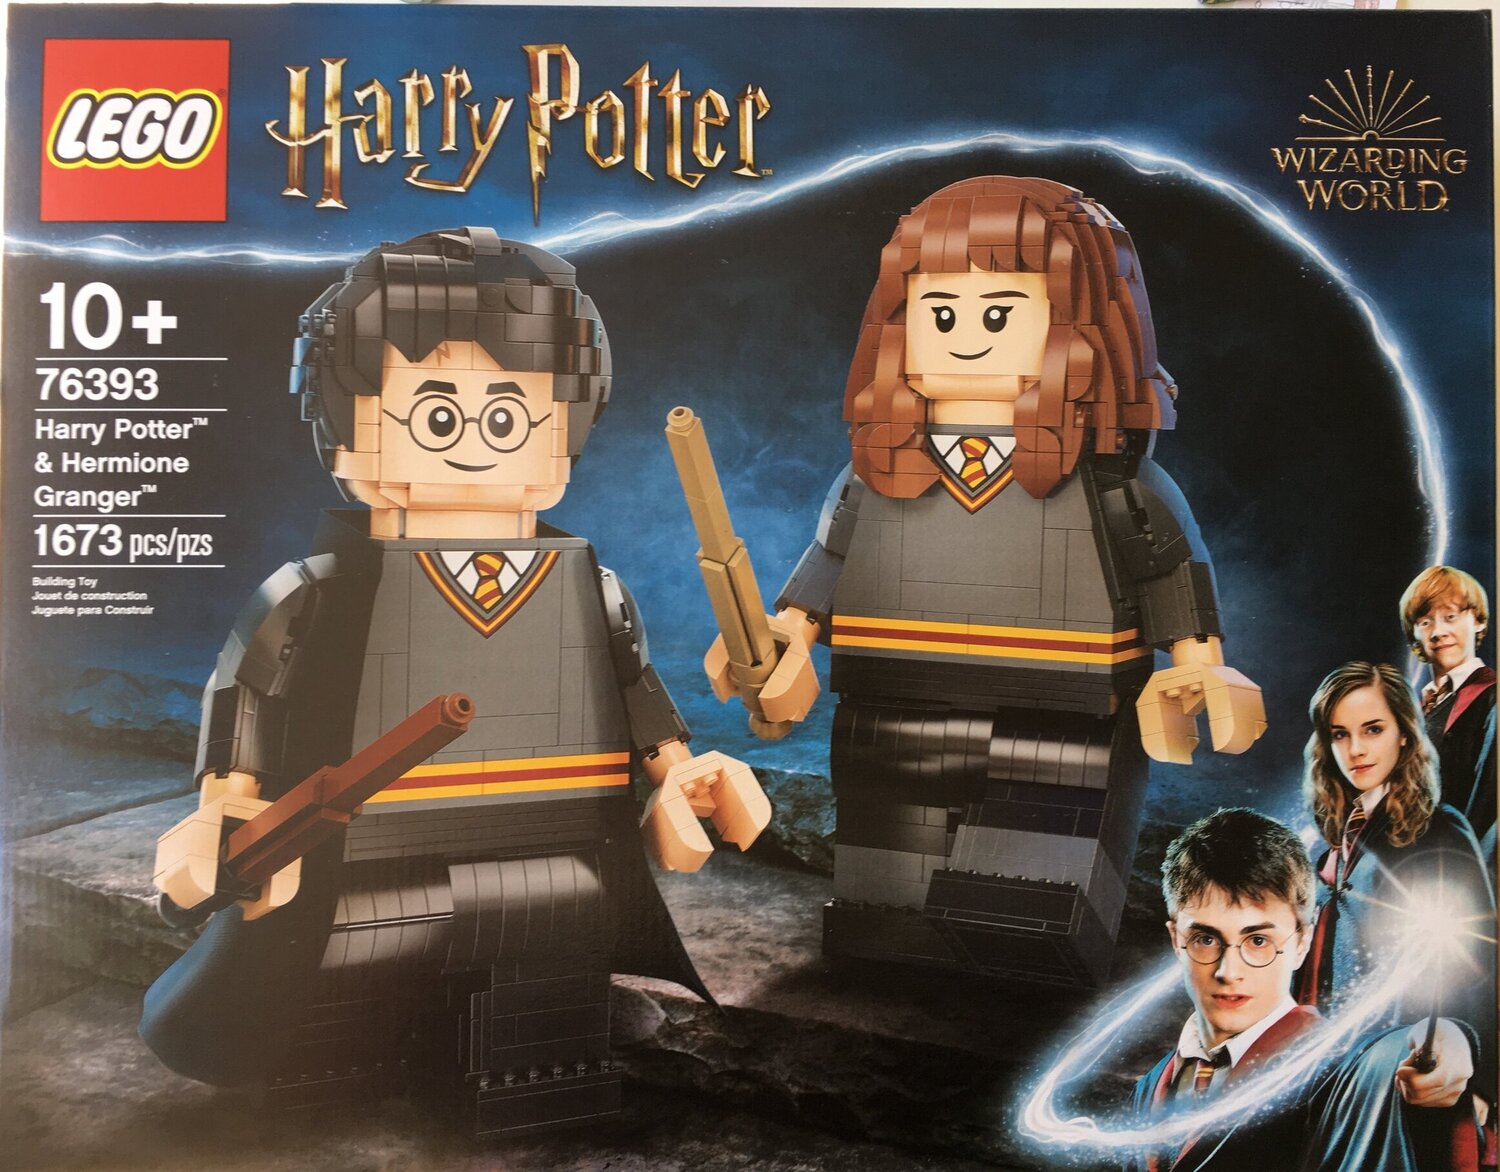 Harry Potter, Ron Weasley and Hermione Granger 3 pack - figurine